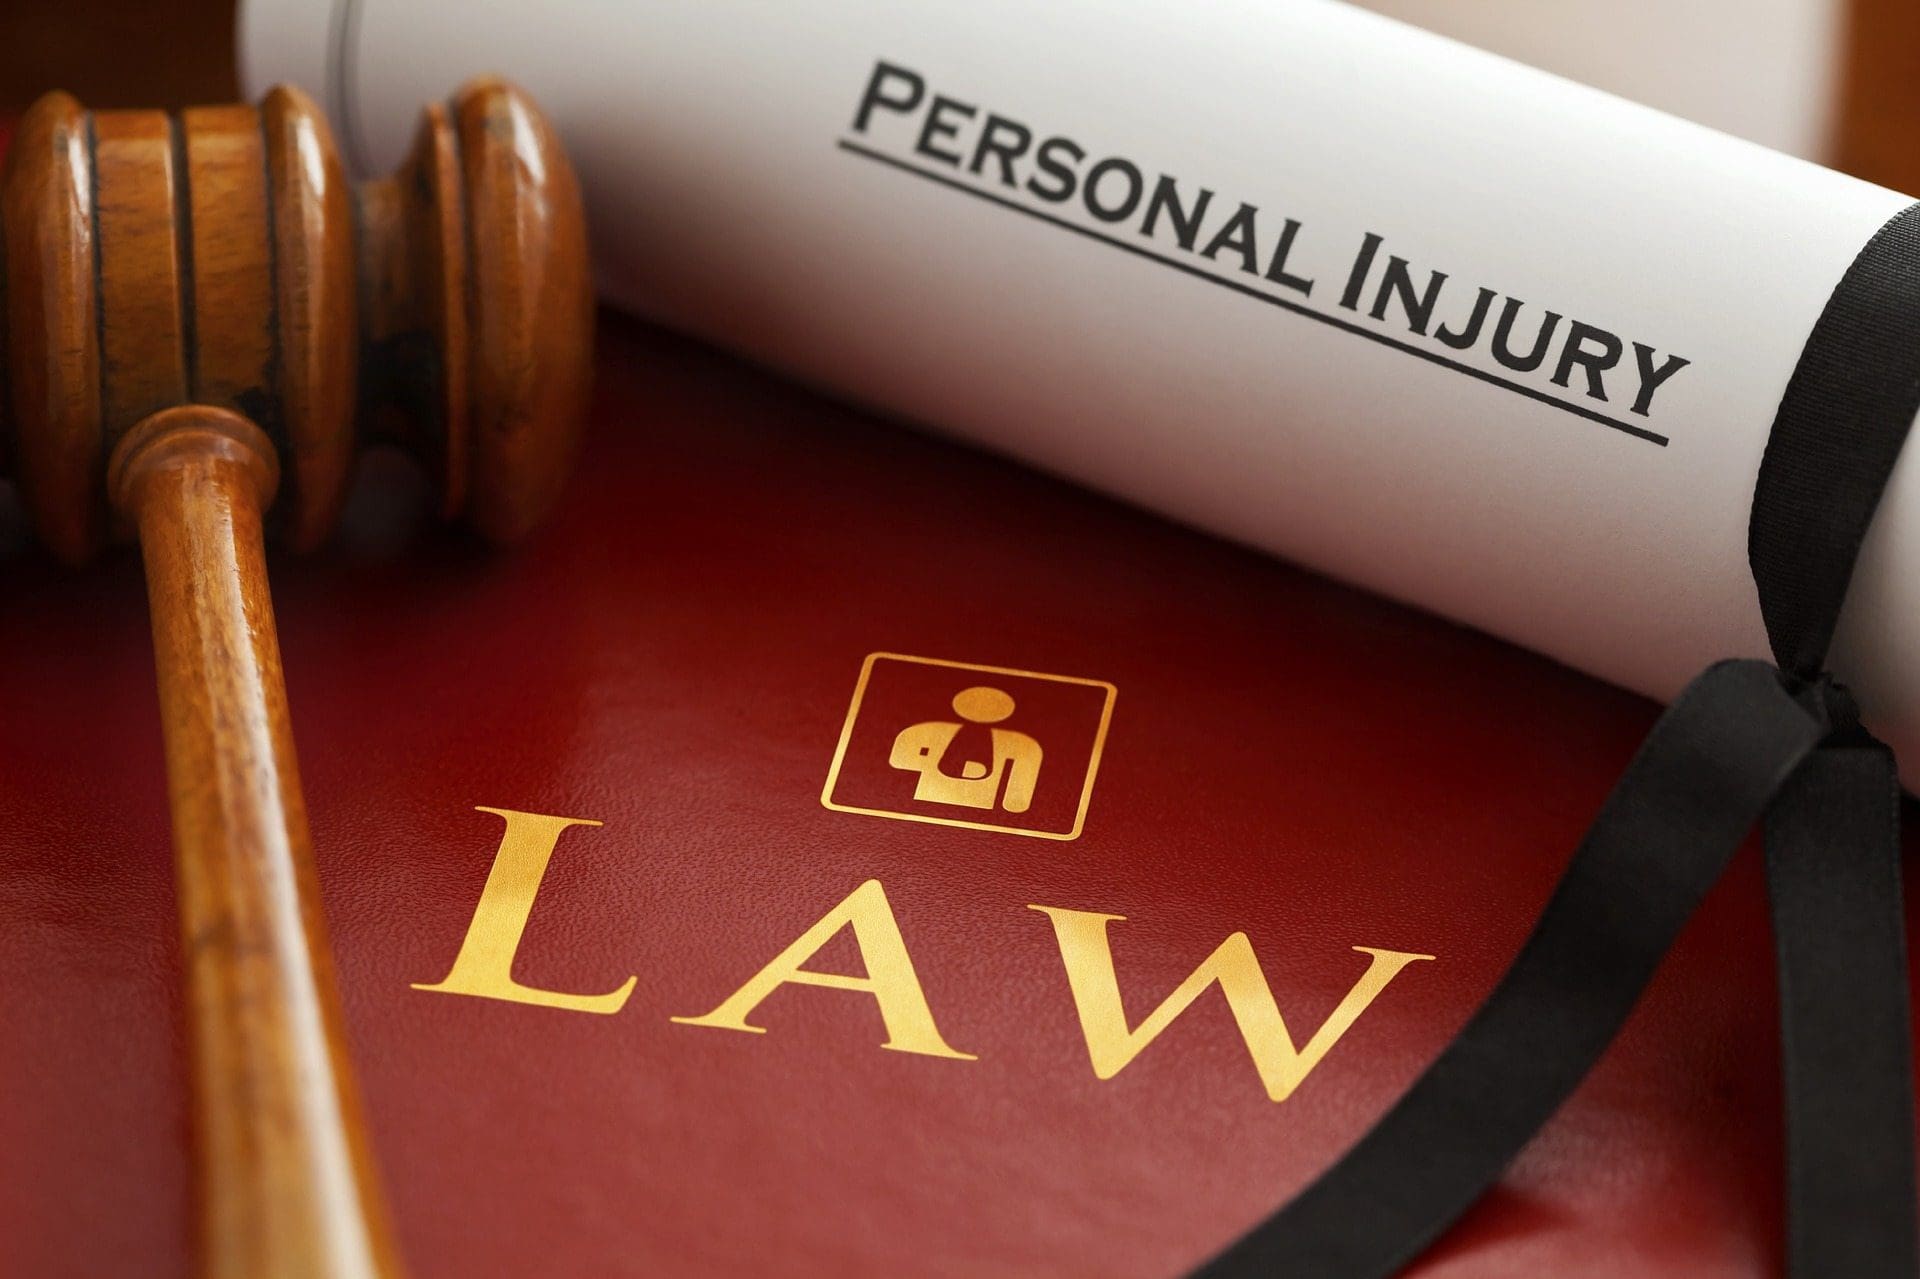 blog picture of gavel, law book, and scroll that says personal injury